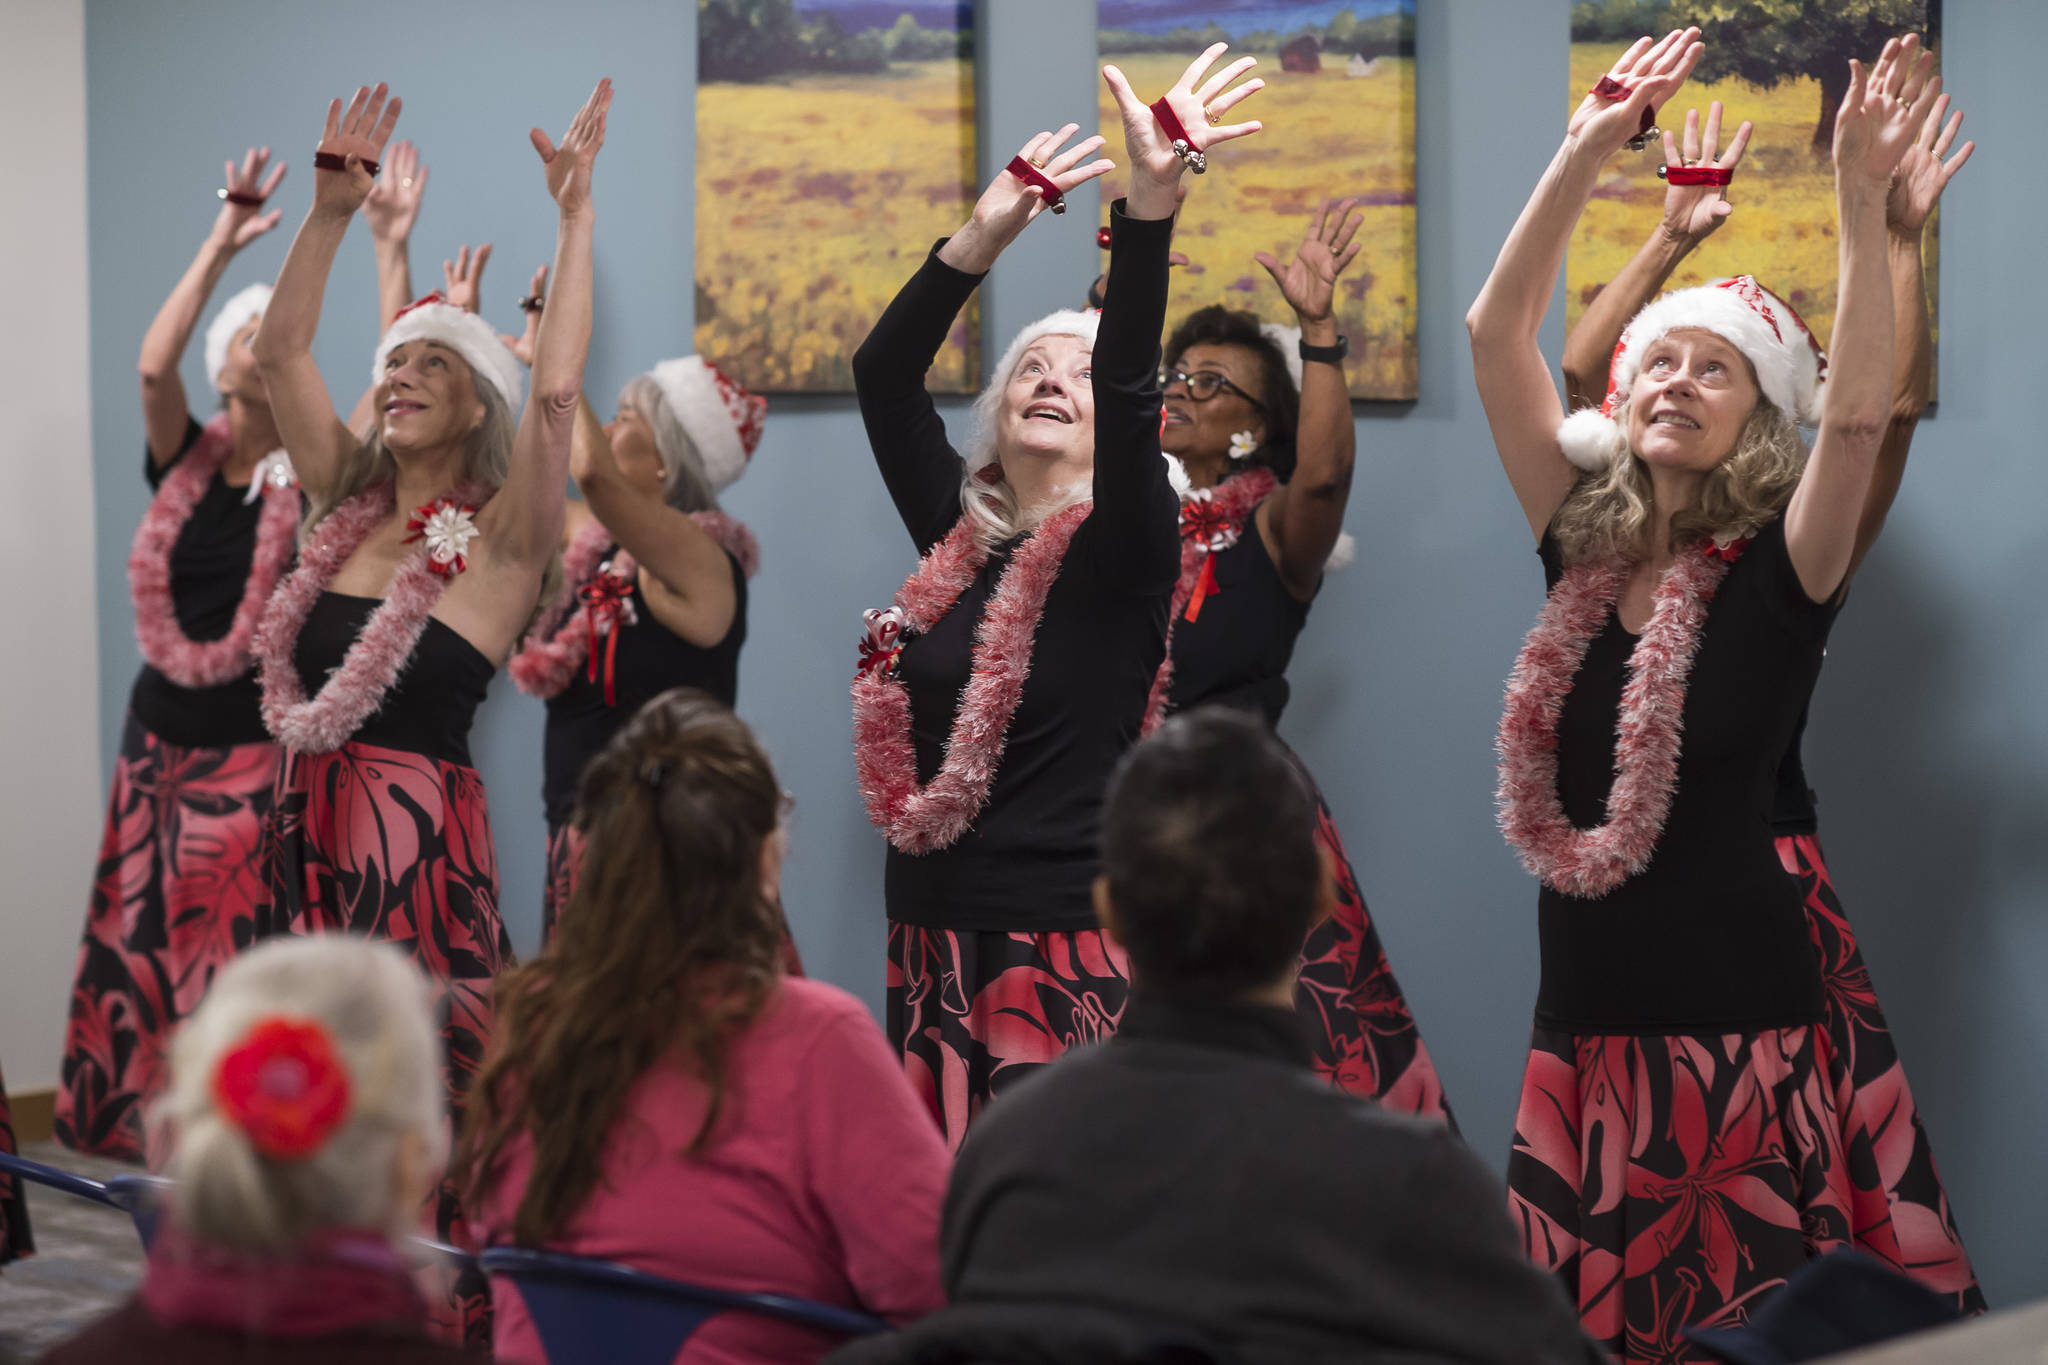 Video: This senior hula group is spreading Christmas cheer